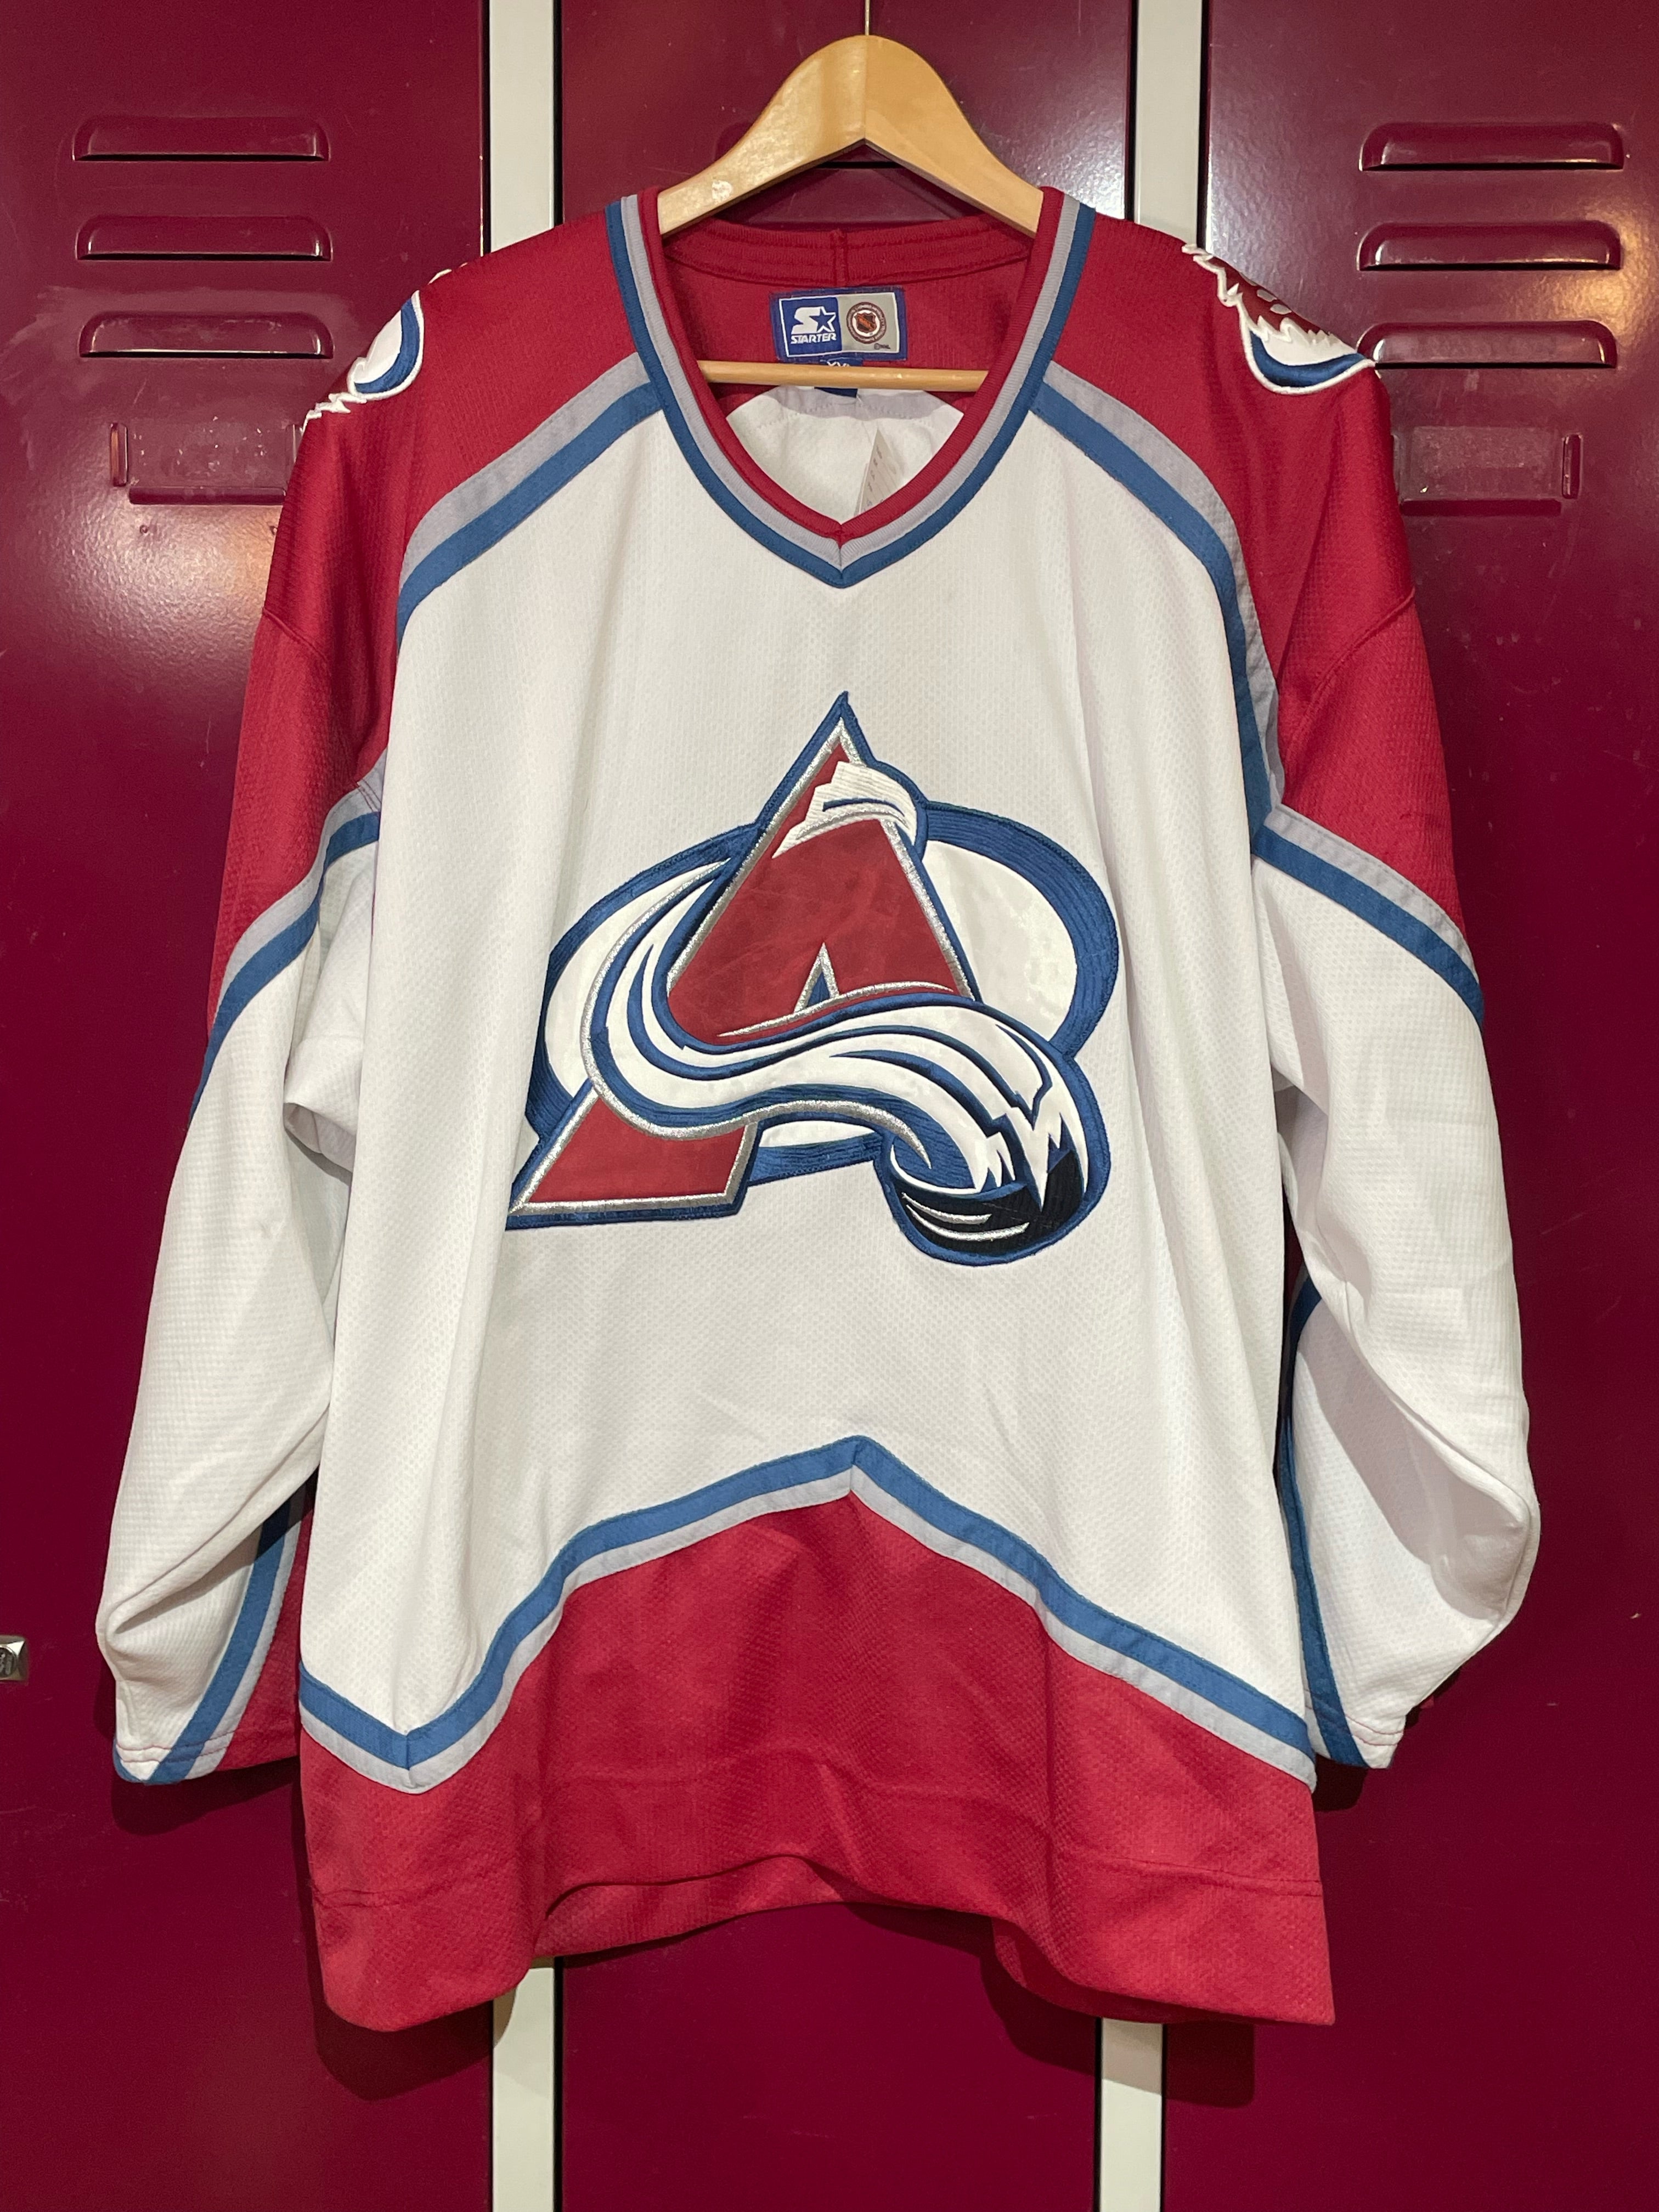 Colorado Avalanche NHL Practice Jersey Sz Small (Only 1 Available) Rare